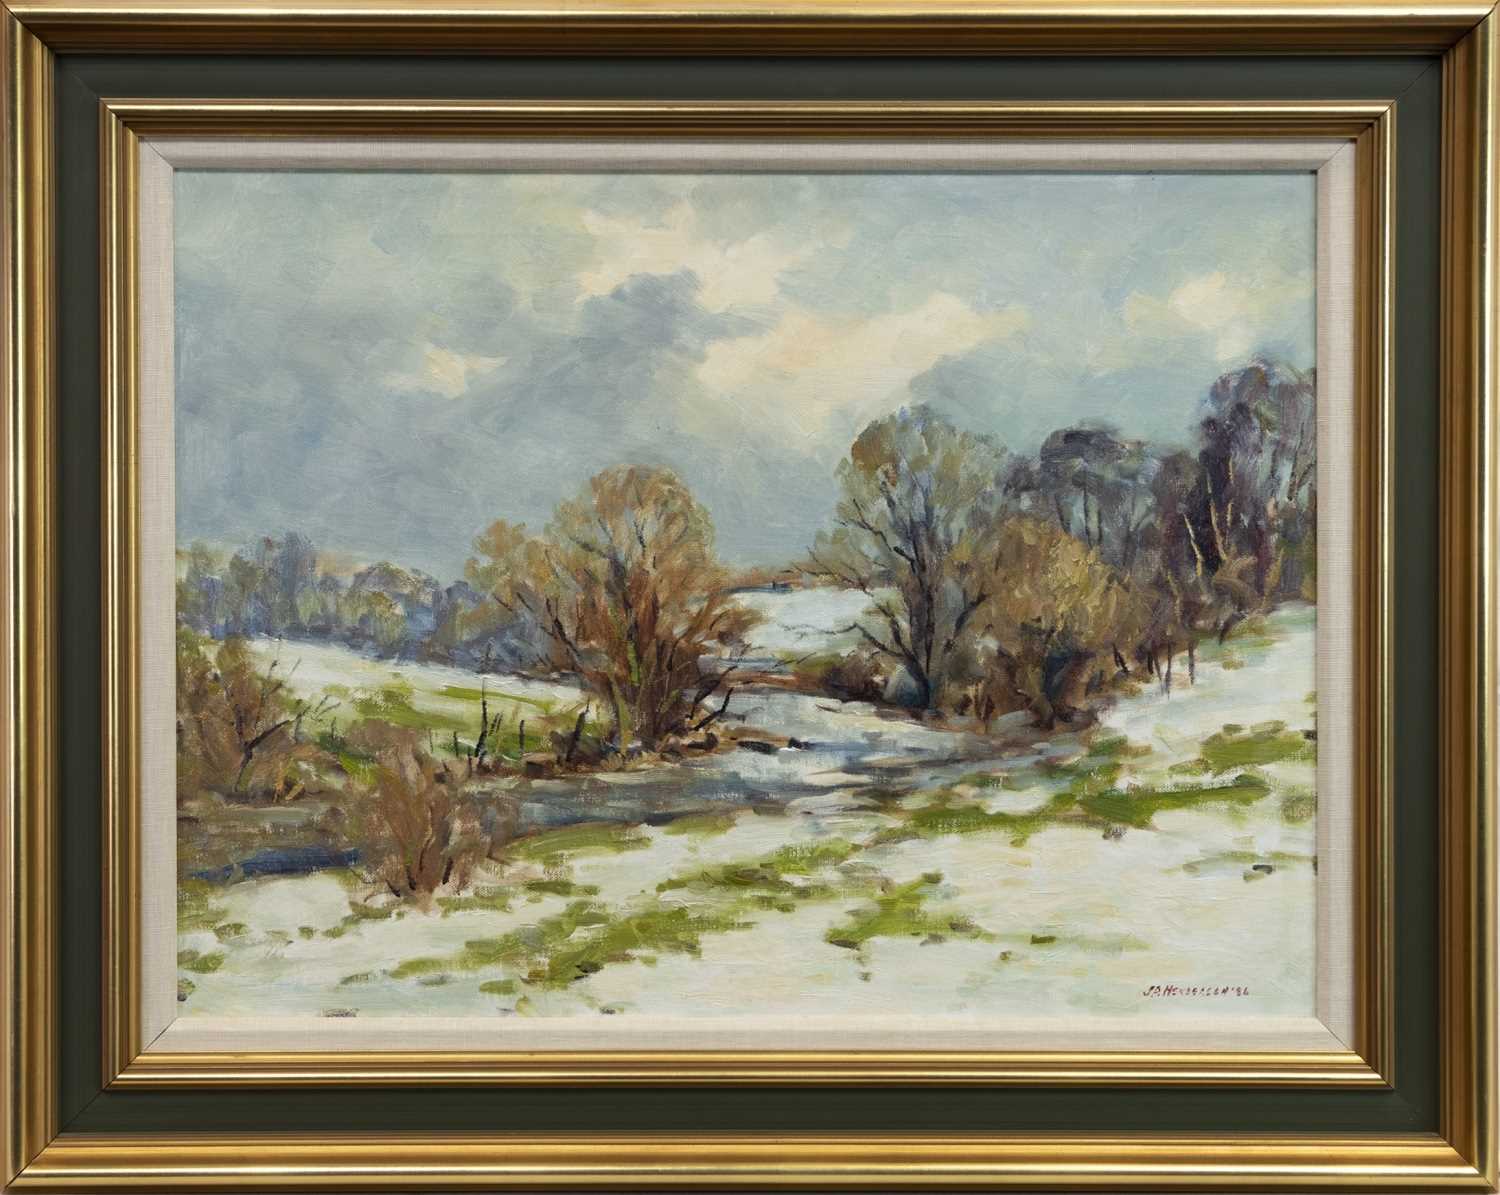 Lot 502 - SNOW, WATERFOOT, AN OIL BY J D HENDERSON